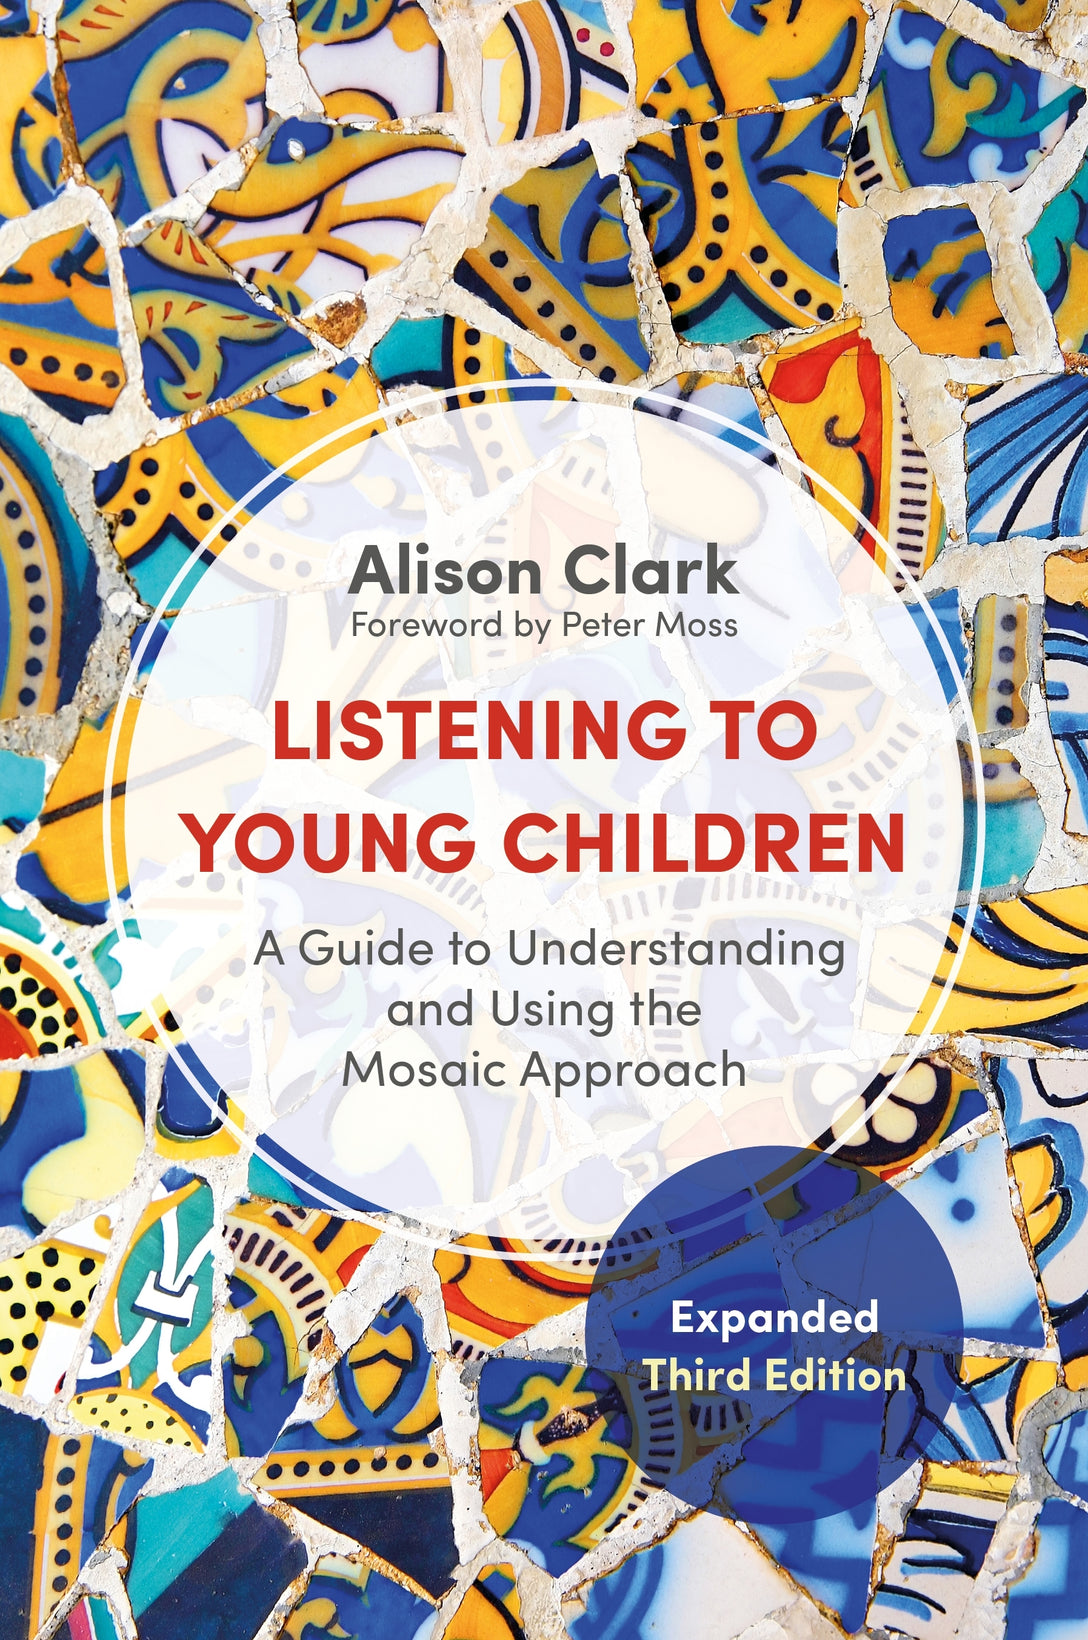 Listening to Young Children, Expanded Third Edition by Peter Moss, Alison Clark